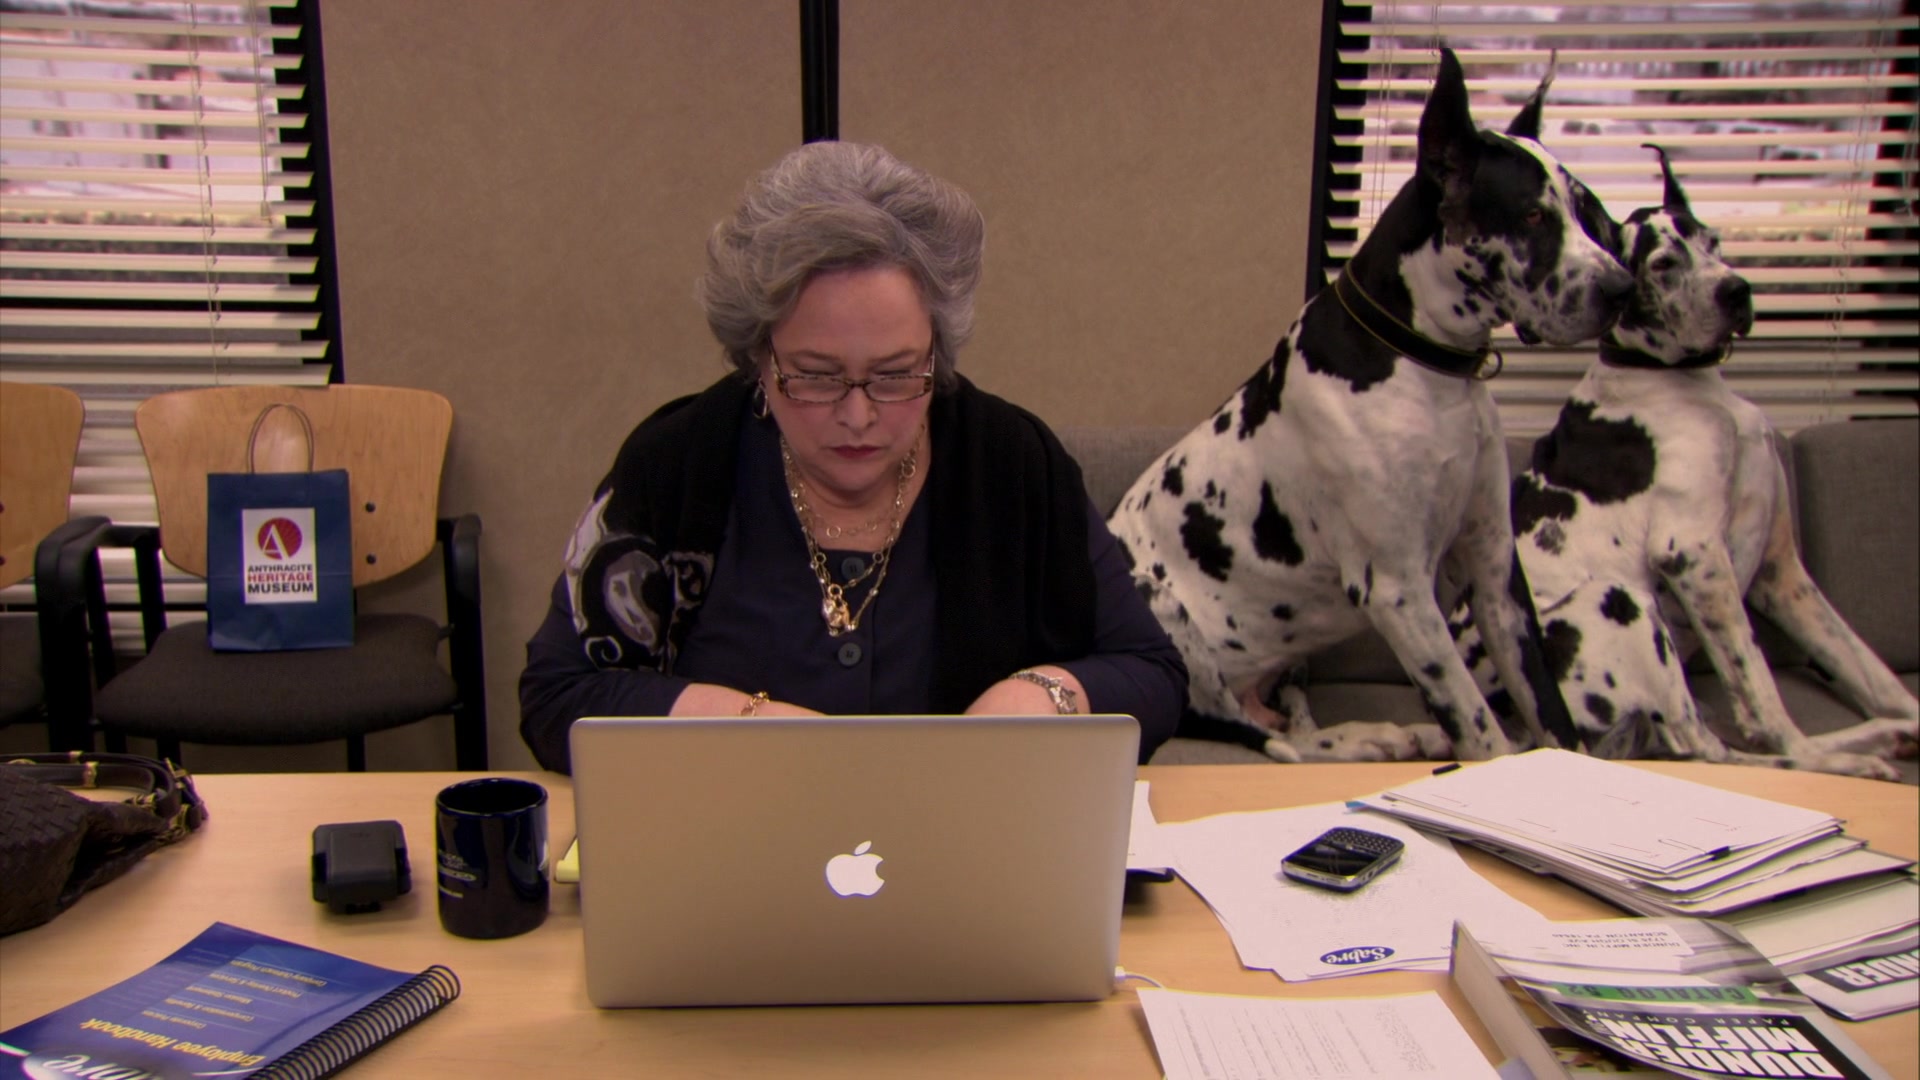 https://productplacementblog.com/wp-content/uploads/2019/06/Apple-MacBook-Pro-Laptop-Used-by-Kathy-Bates-Jo-Bennett-in-The-Office-4.jpg